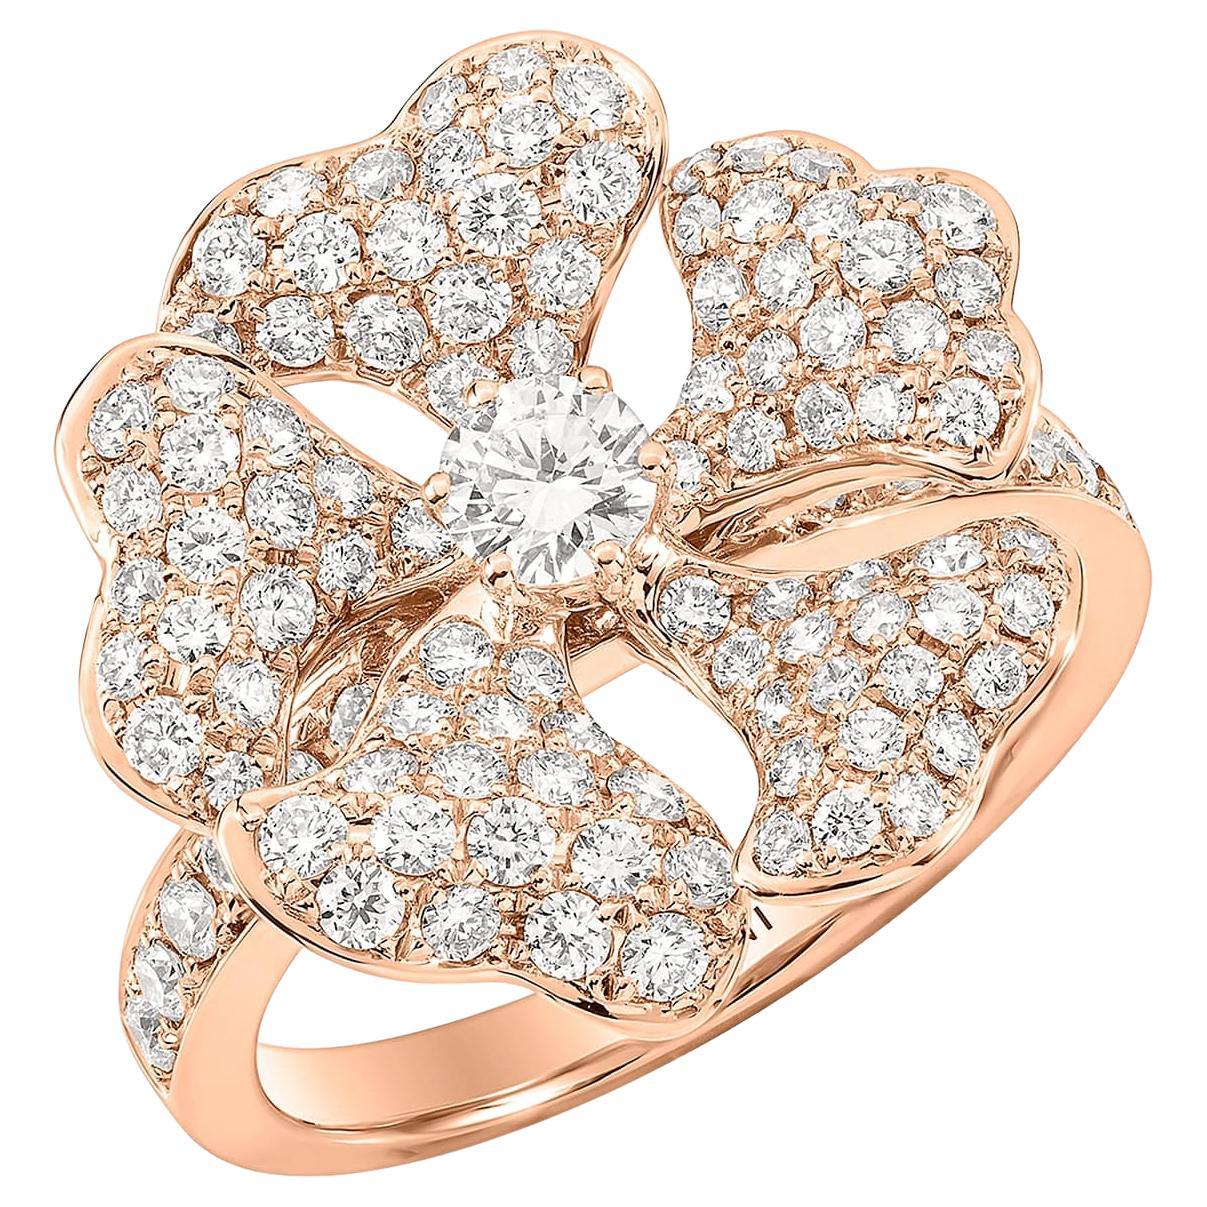 Bloom Gold and Pave Diamond Ring in 18k Rose Gold